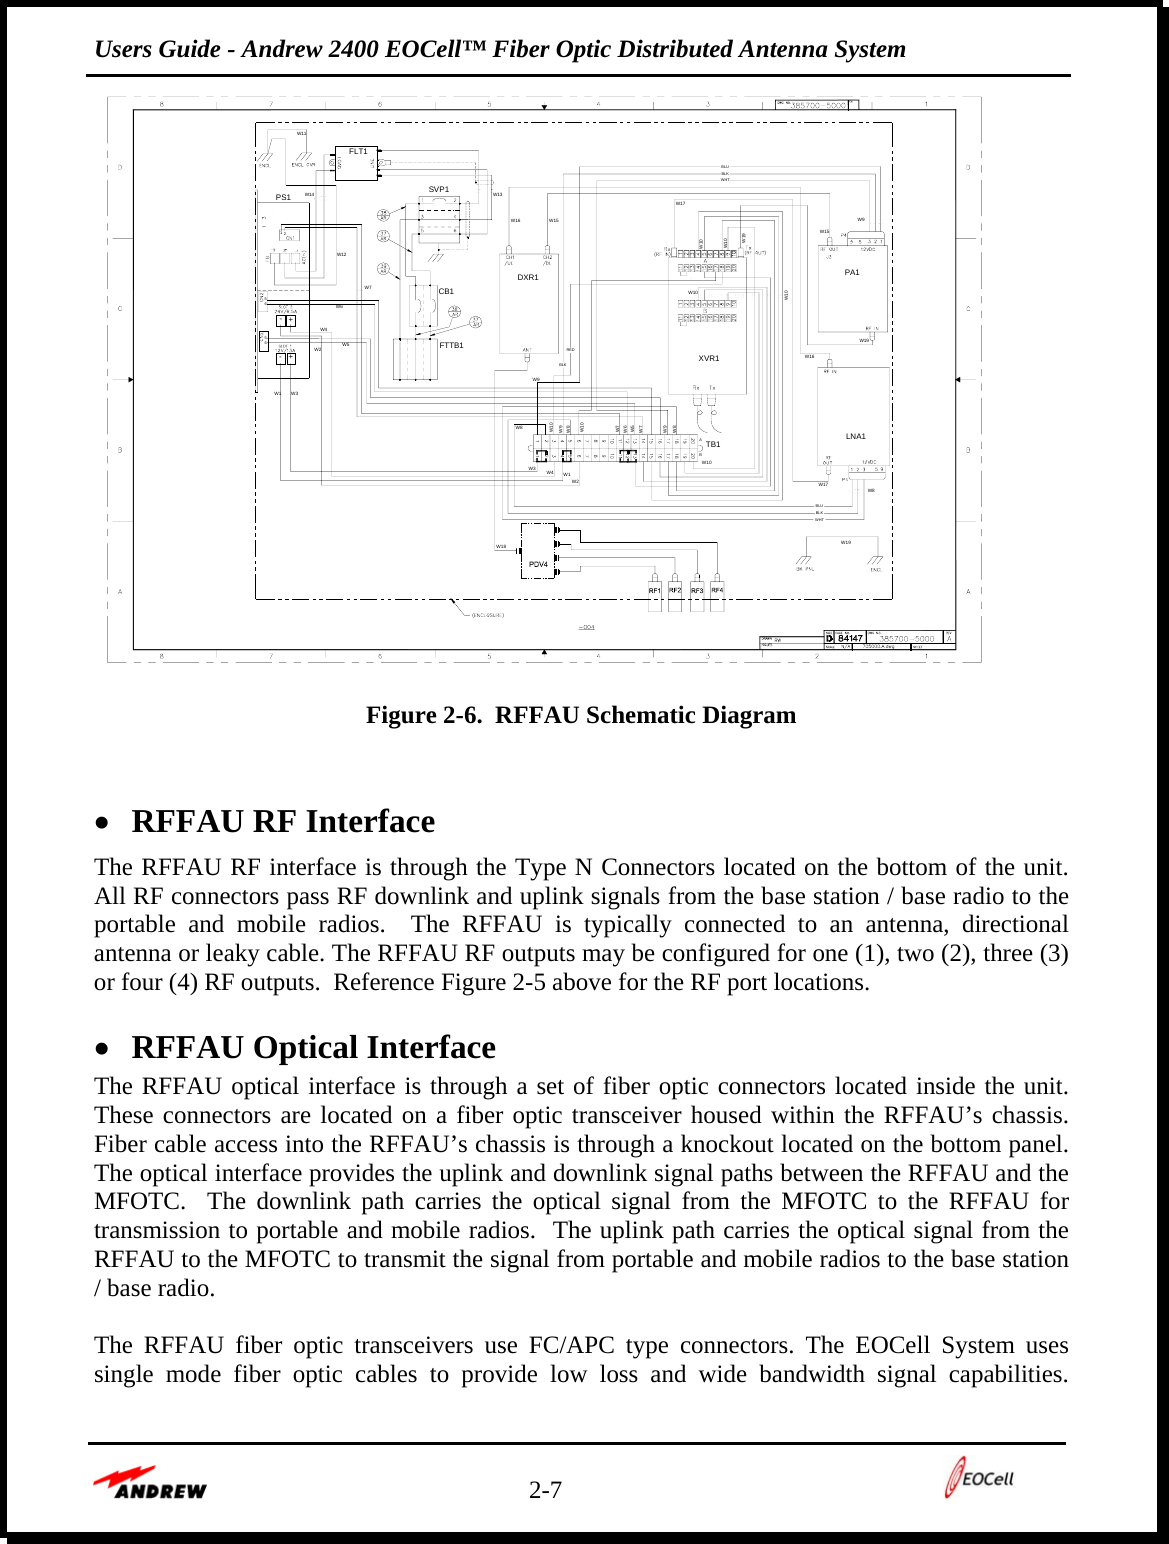 Users Guide - Andrew 2400 EOCell™ Fiber Optic Distributed Antenna System    2-7     Figure 2-6.  RFFAU Schematic Diagram   • RFFAU RF Interface The RFFAU RF interface is through the Type N Connectors located on the bottom of the unit. All RF connectors pass RF downlink and uplink signals from the base station / base radio to the portable and mobile radios.  The RFFAU is typically connected to an antenna, directional antenna or leaky cable. The RFFAU RF outputs may be configured for one (1), two (2), three (3) or four (4) RF outputs.  Reference Figure 2-5 above for the RF port locations.  • RFFAU Optical Interface The RFFAU optical interface is through a set of fiber optic connectors located inside the unit.  These connectors are located on a fiber optic transceiver housed within the RFFAU’s chassis.  Fiber cable access into the RFFAU’s chassis is through a knockout located on the bottom panel.  The optical interface provides the uplink and downlink signal paths between the RFFAU and the MFOTC.  The downlink path carries the optical signal from the MFOTC to the RFFAU for transmission to portable and mobile radios.  The uplink path carries the optical signal from the RFFAU to the MFOTC to transmit the signal from portable and mobile radios to the base station / base radio.    The RFFAU fiber optic transceivers use FC/APC type connectors. The EOCell System uses single mode fiber optic cables to provide low loss and wide bandwidth signal capabilities.  W14W4W3W1W2PS1W11W4W3TB1W2W1W10BAW10W9W8FTTB1W6W9W8W9XVR1LNA1W8DXR1CB1W12W7 W10W10W10W10SVP1FLT1W9PA1-WHTBLKBLUBLUBLKWHTW16 W15W16W19W19W17W17REDW7W5W712+-+5656W5W8W10BLKW6W15W13W19W18